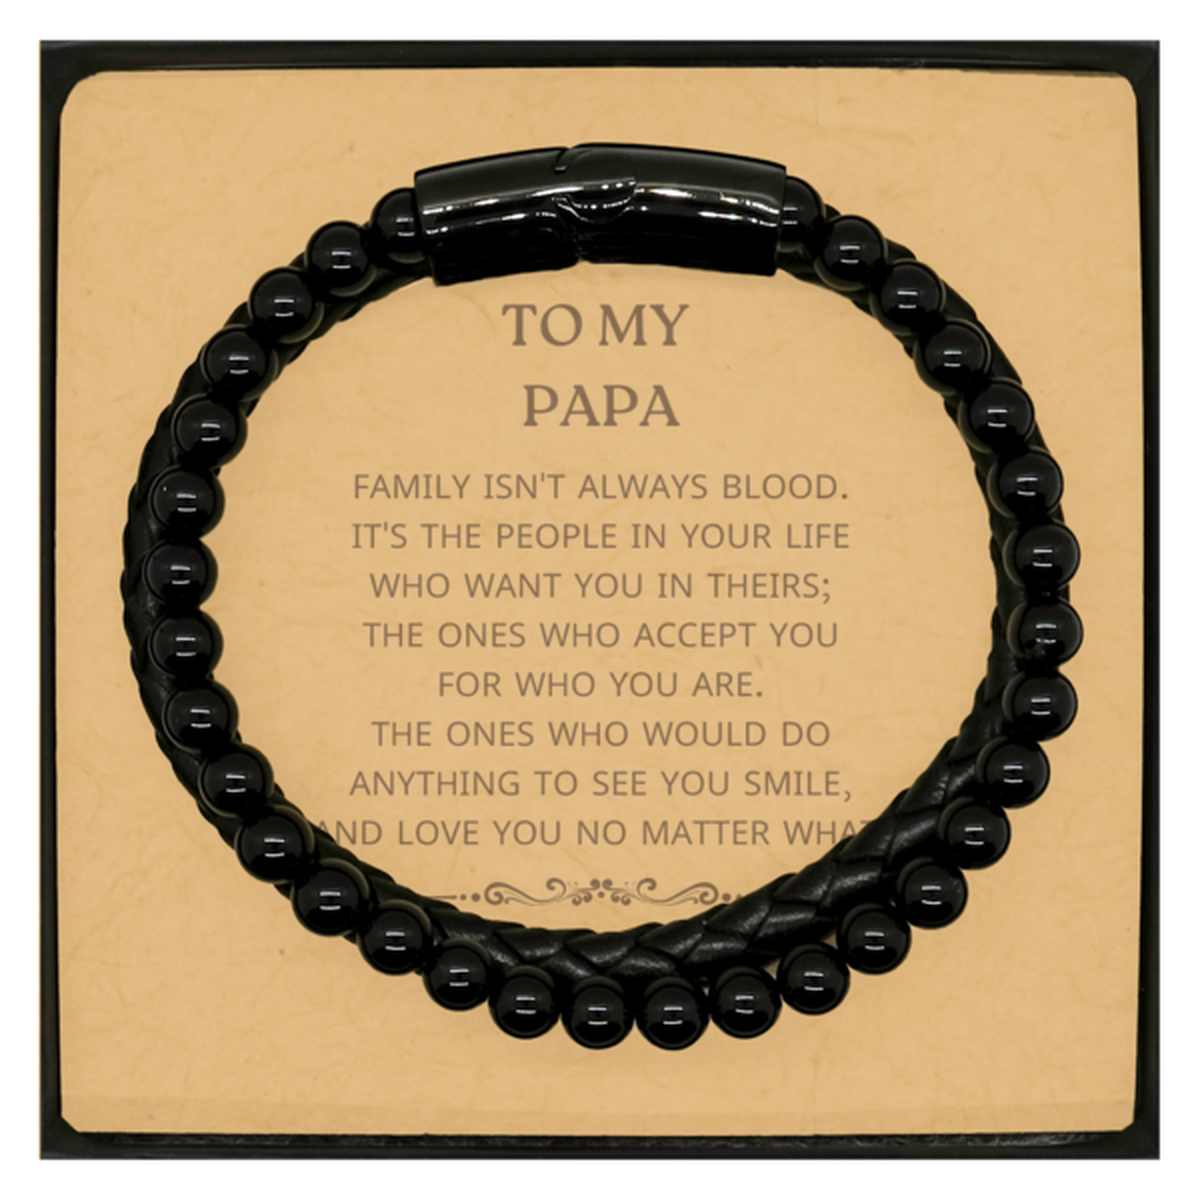 To My Papa Gifts, Family isn't always blood, Papa Stone Leather Bracelets, Birthday Christmas Unique Present For Papa